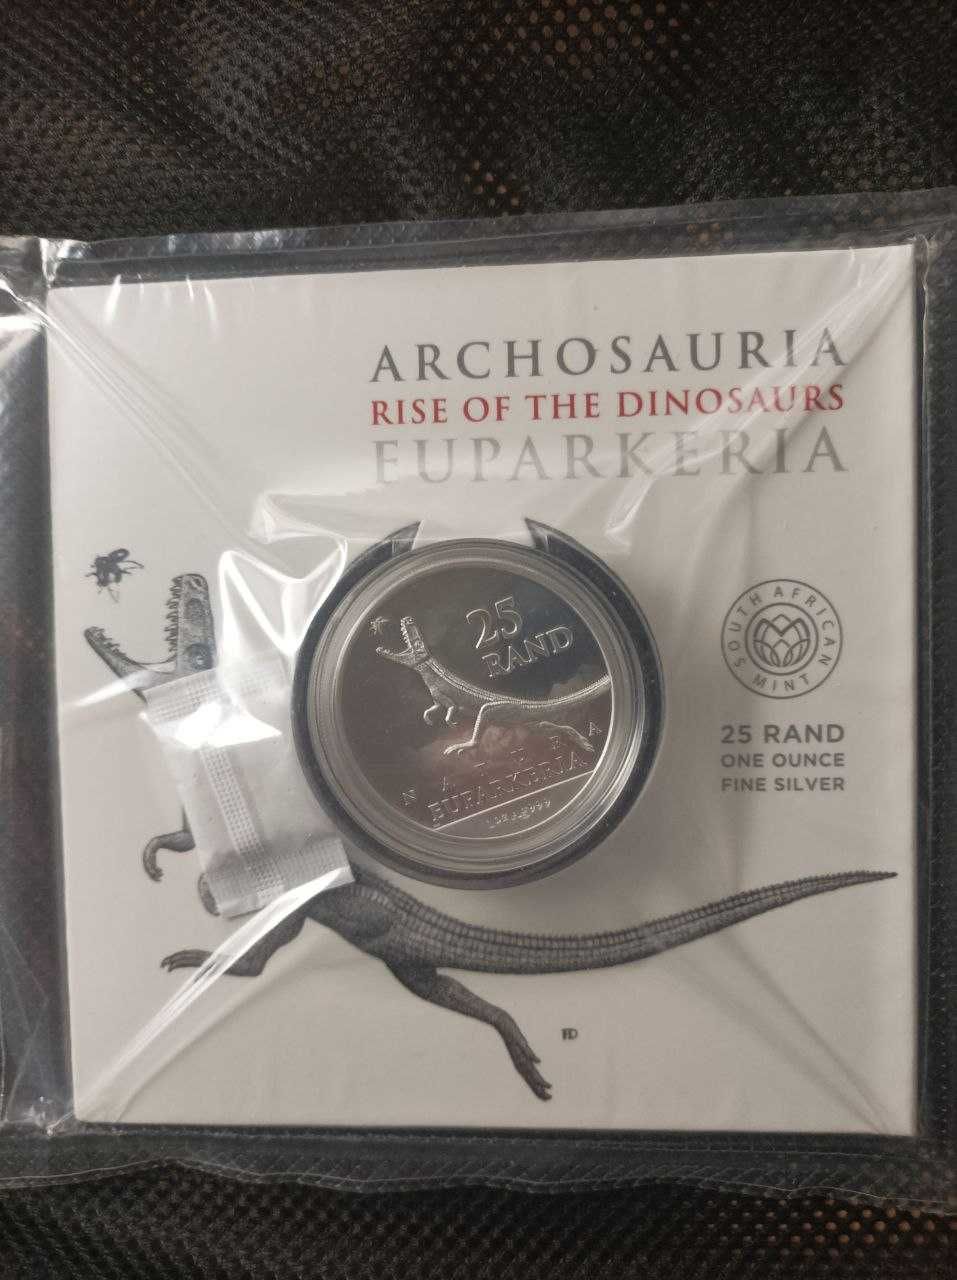 ARCHOSAUR The rise of the Dinosaurs 1 Oz Silver